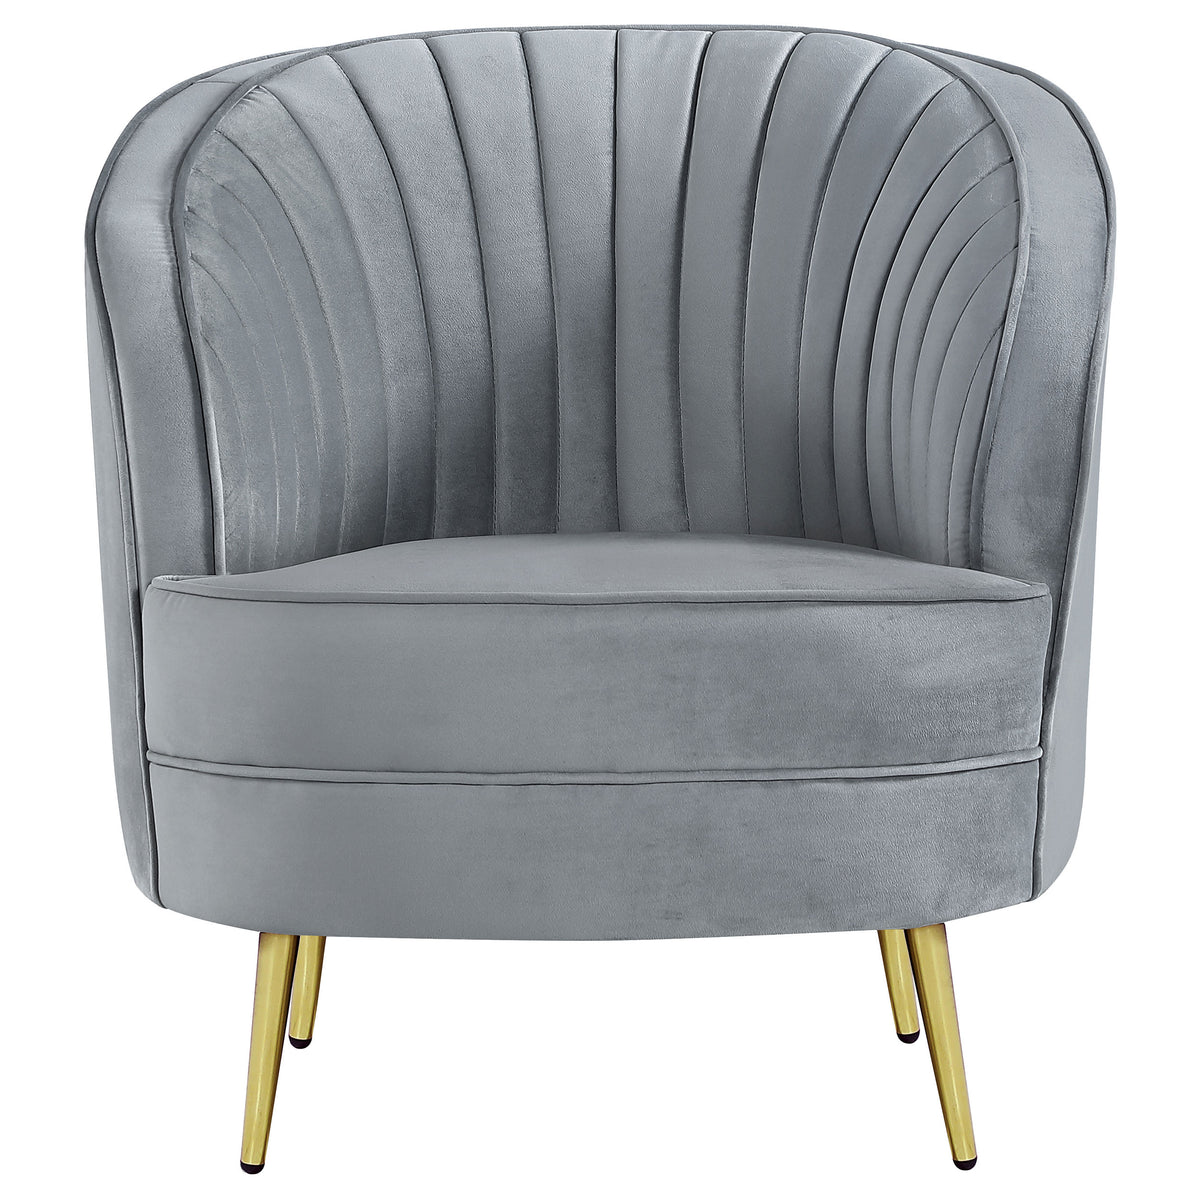 Sophia Upholstered Chair Grey and Gold  Las Vegas Furniture Stores